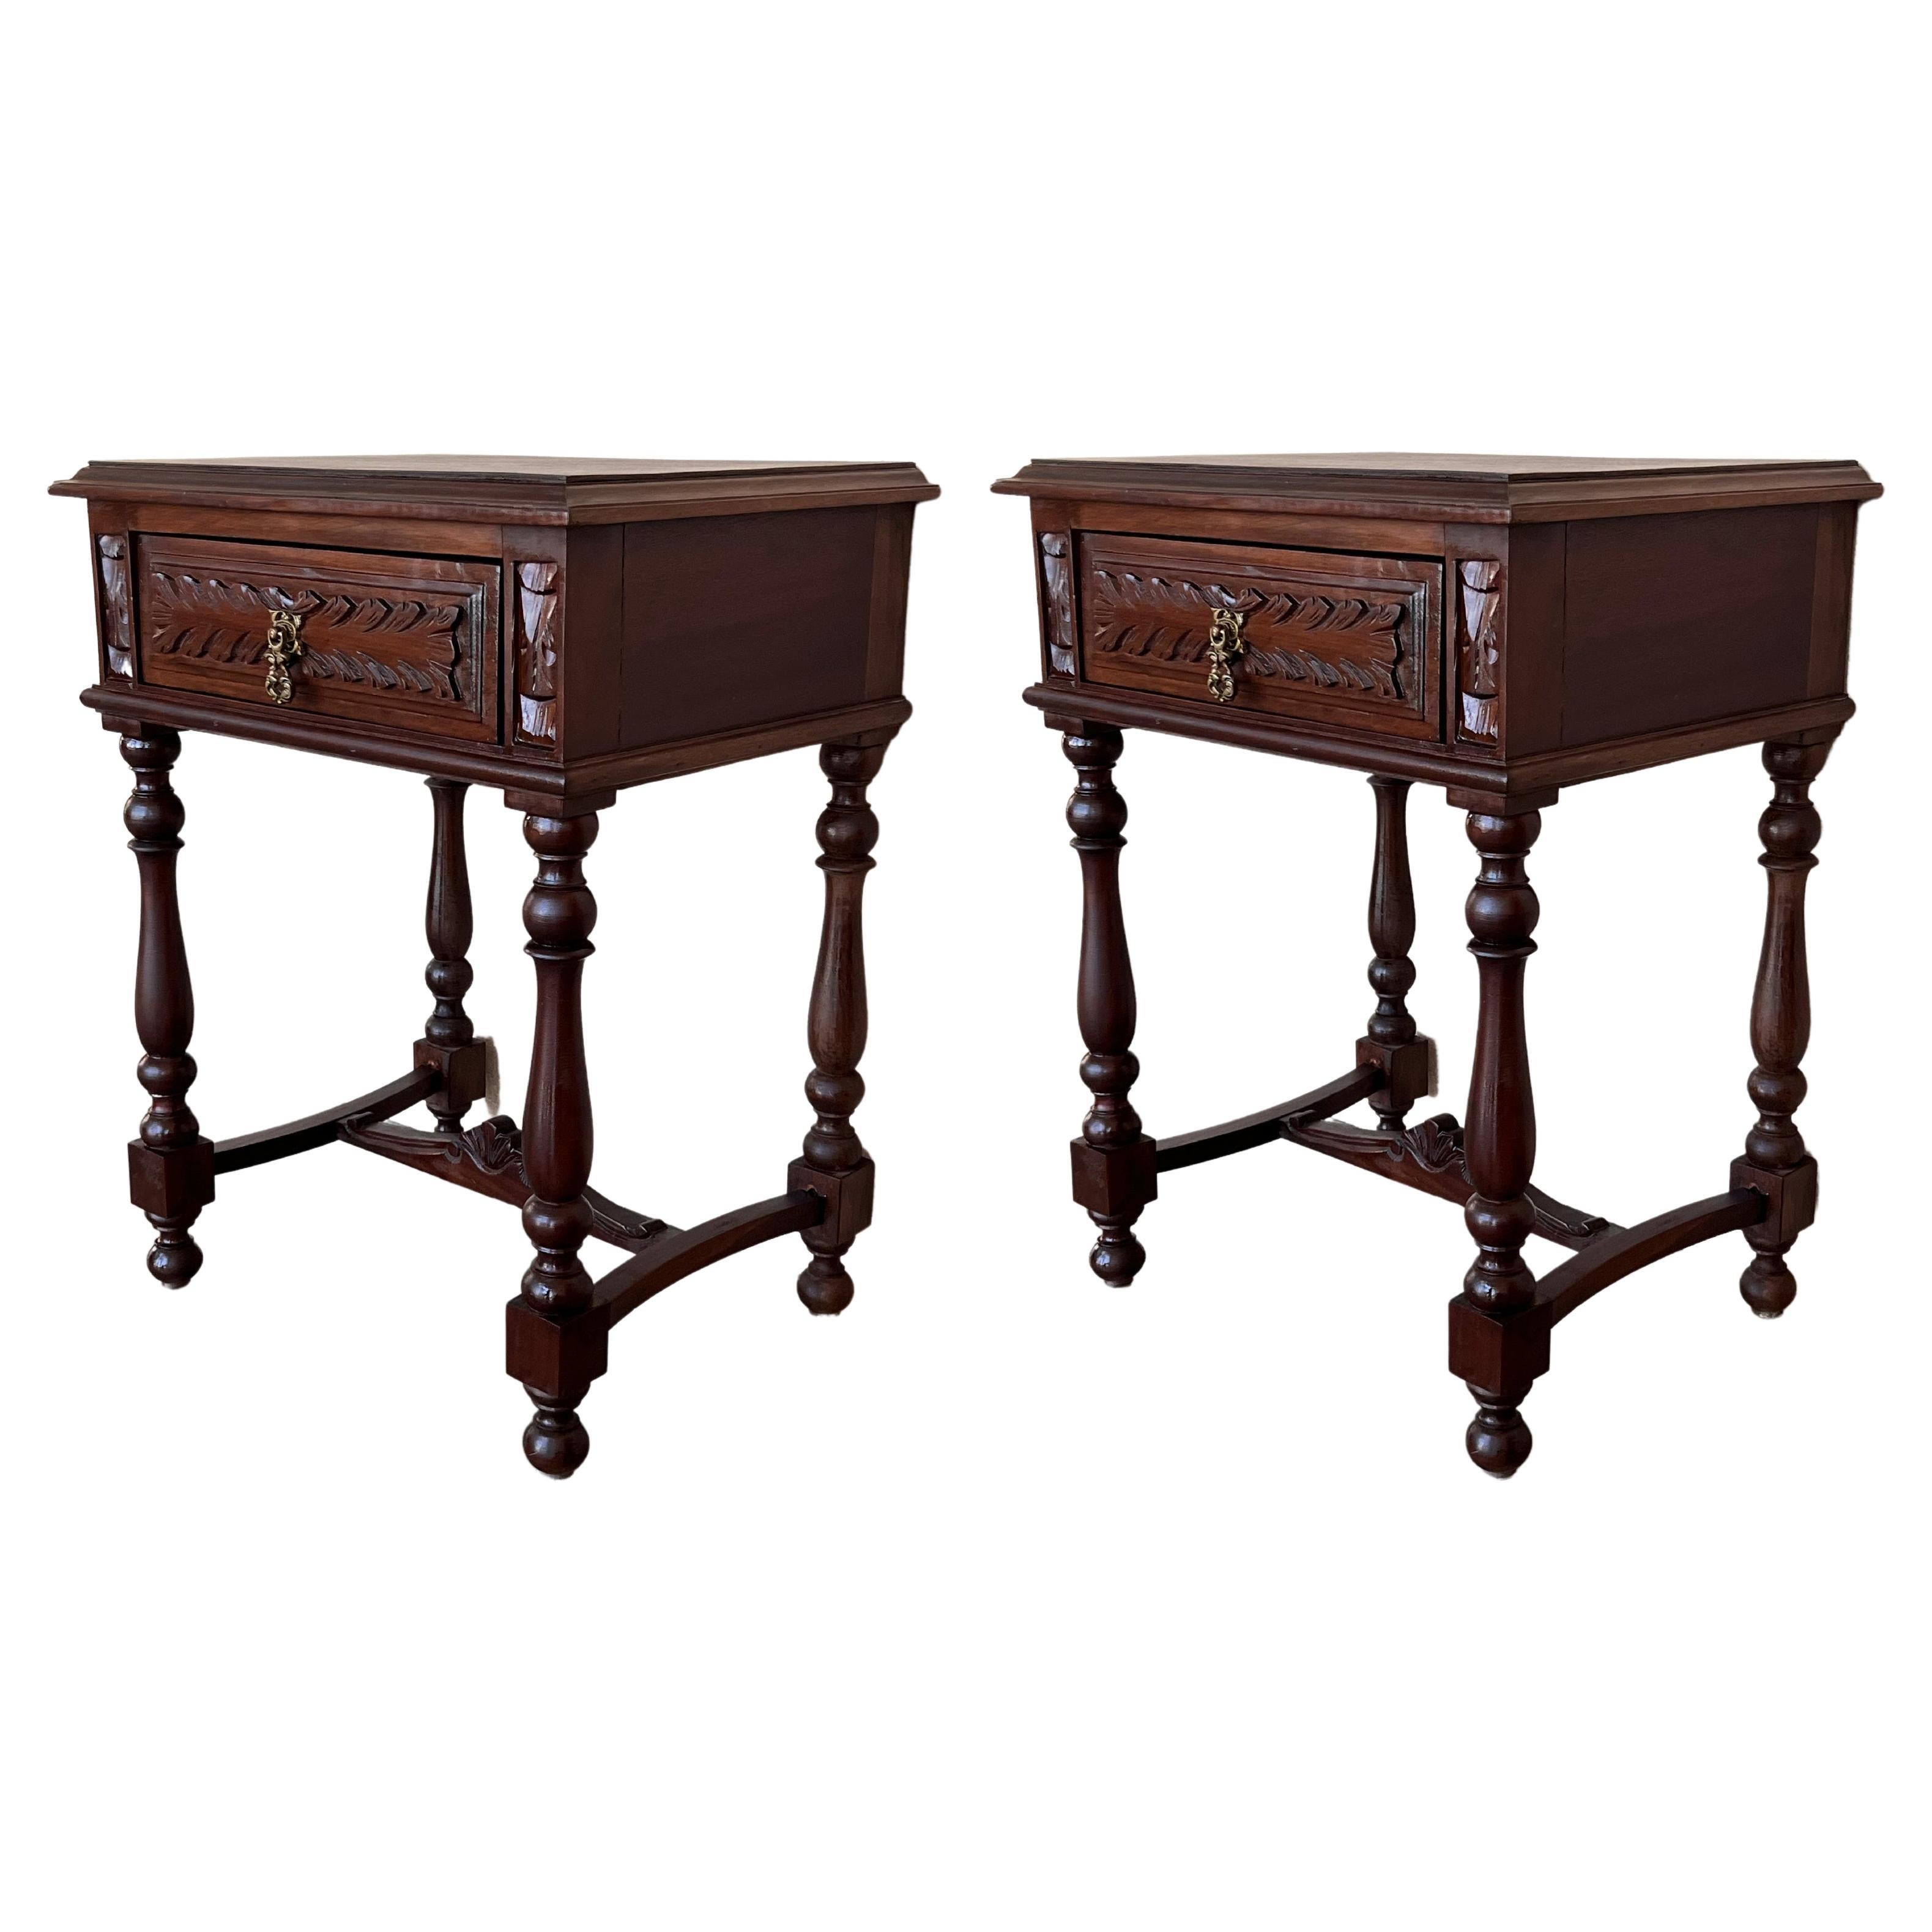 20th Pair of Spanish Nightstands with Carved Drawer and beautiful stretcher